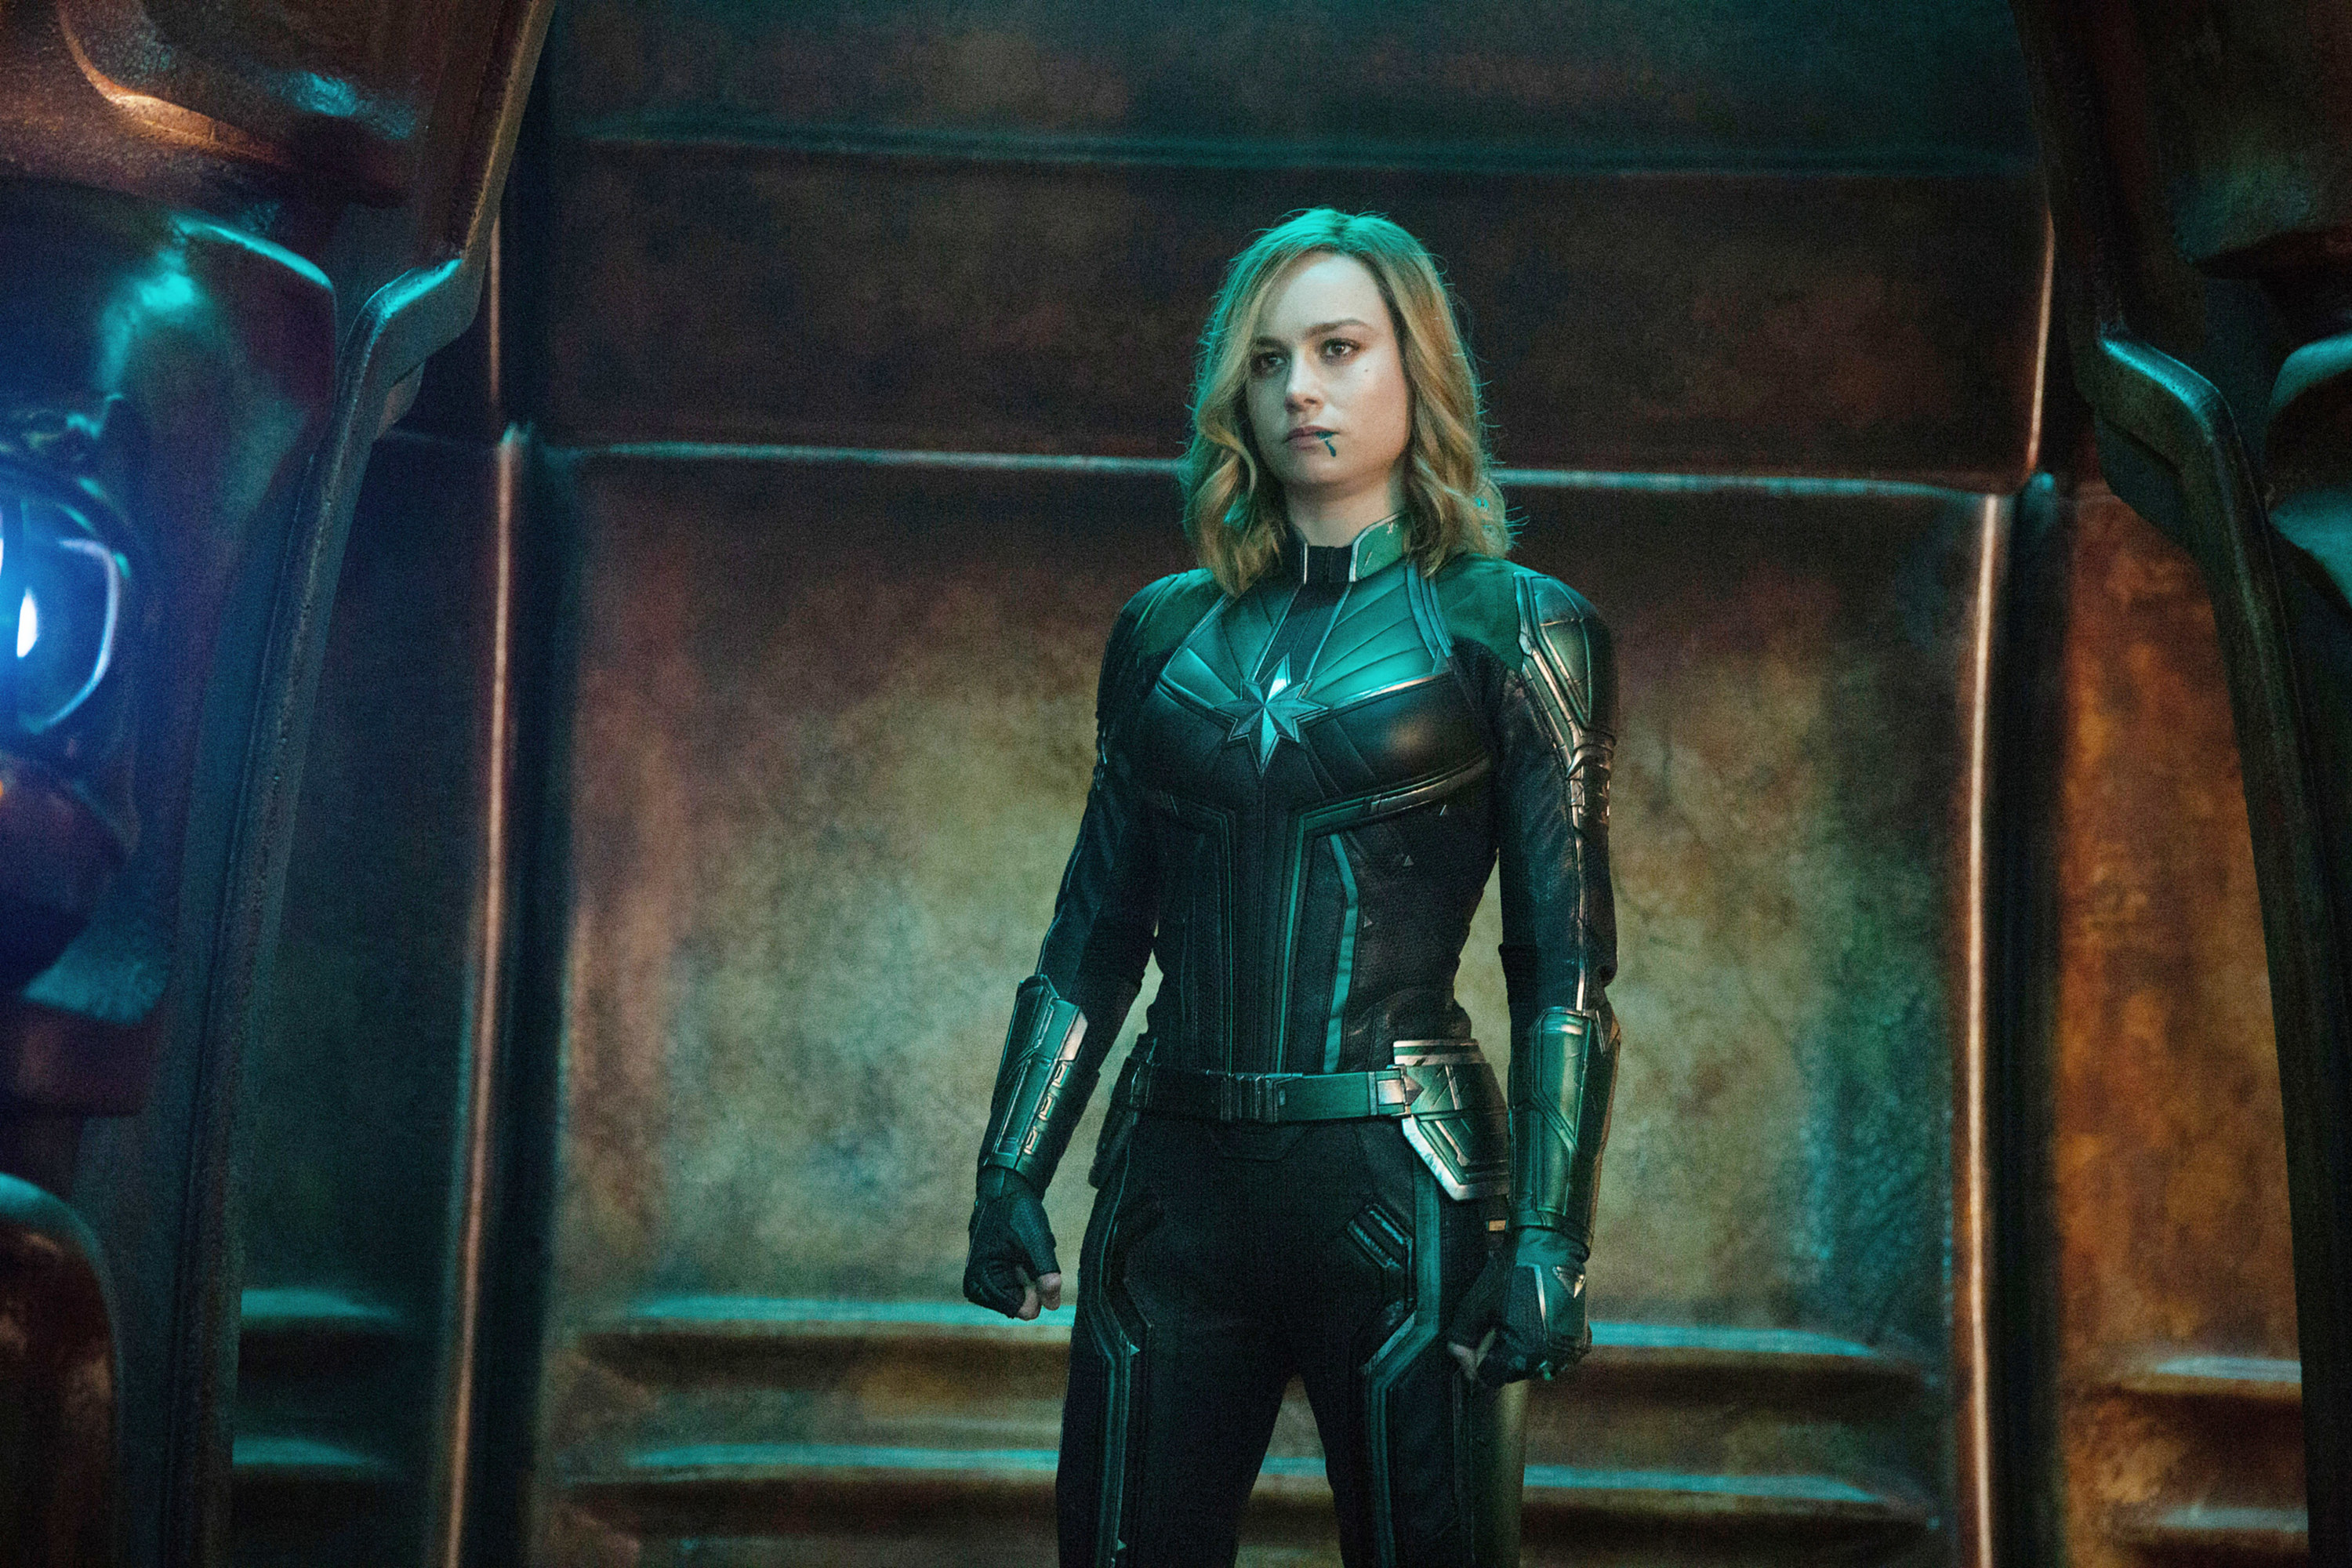 Captain Marvel suits up while looking ready to fight